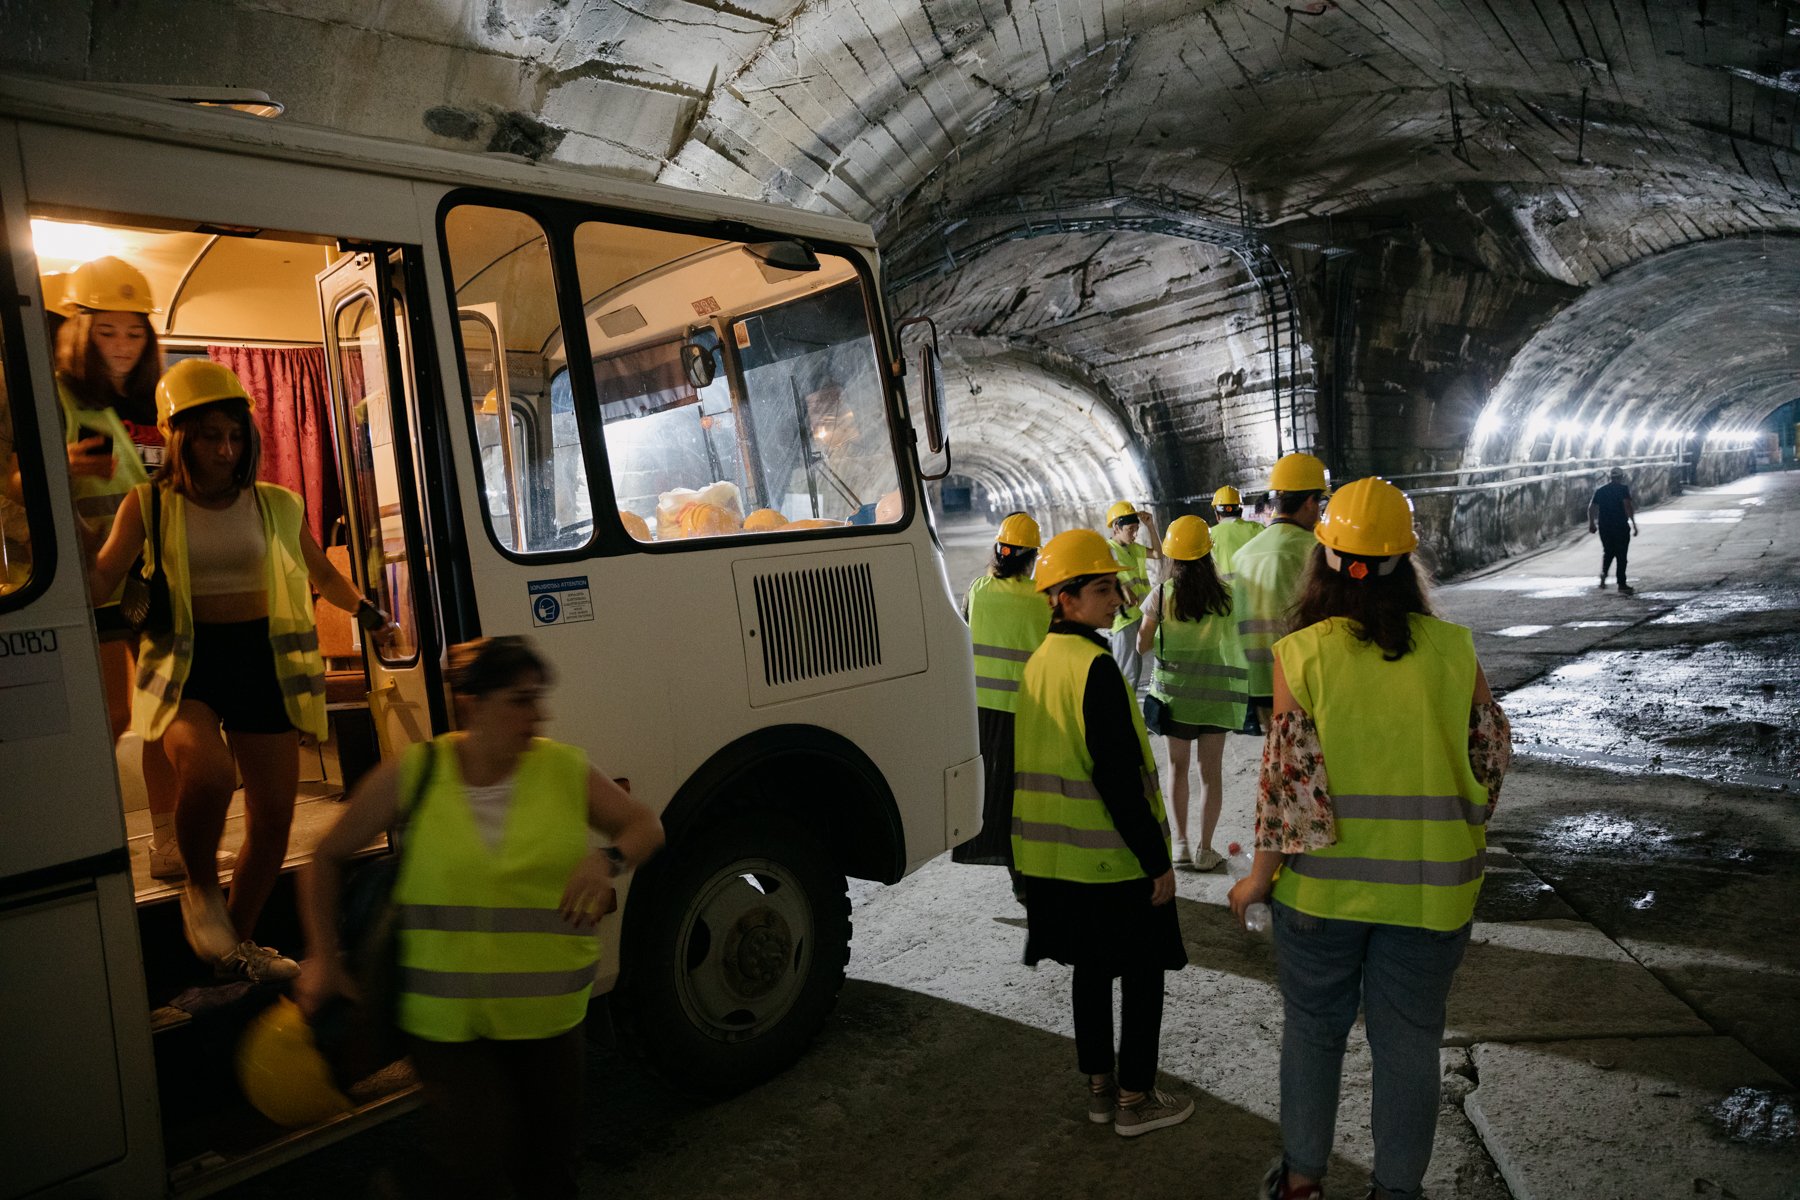  A school group from Tsalenjikha tours the Enguri Dam. At the end of the tunnel on the right are the pipes that feed water to hydroelectric power plants in Abkhazia. 